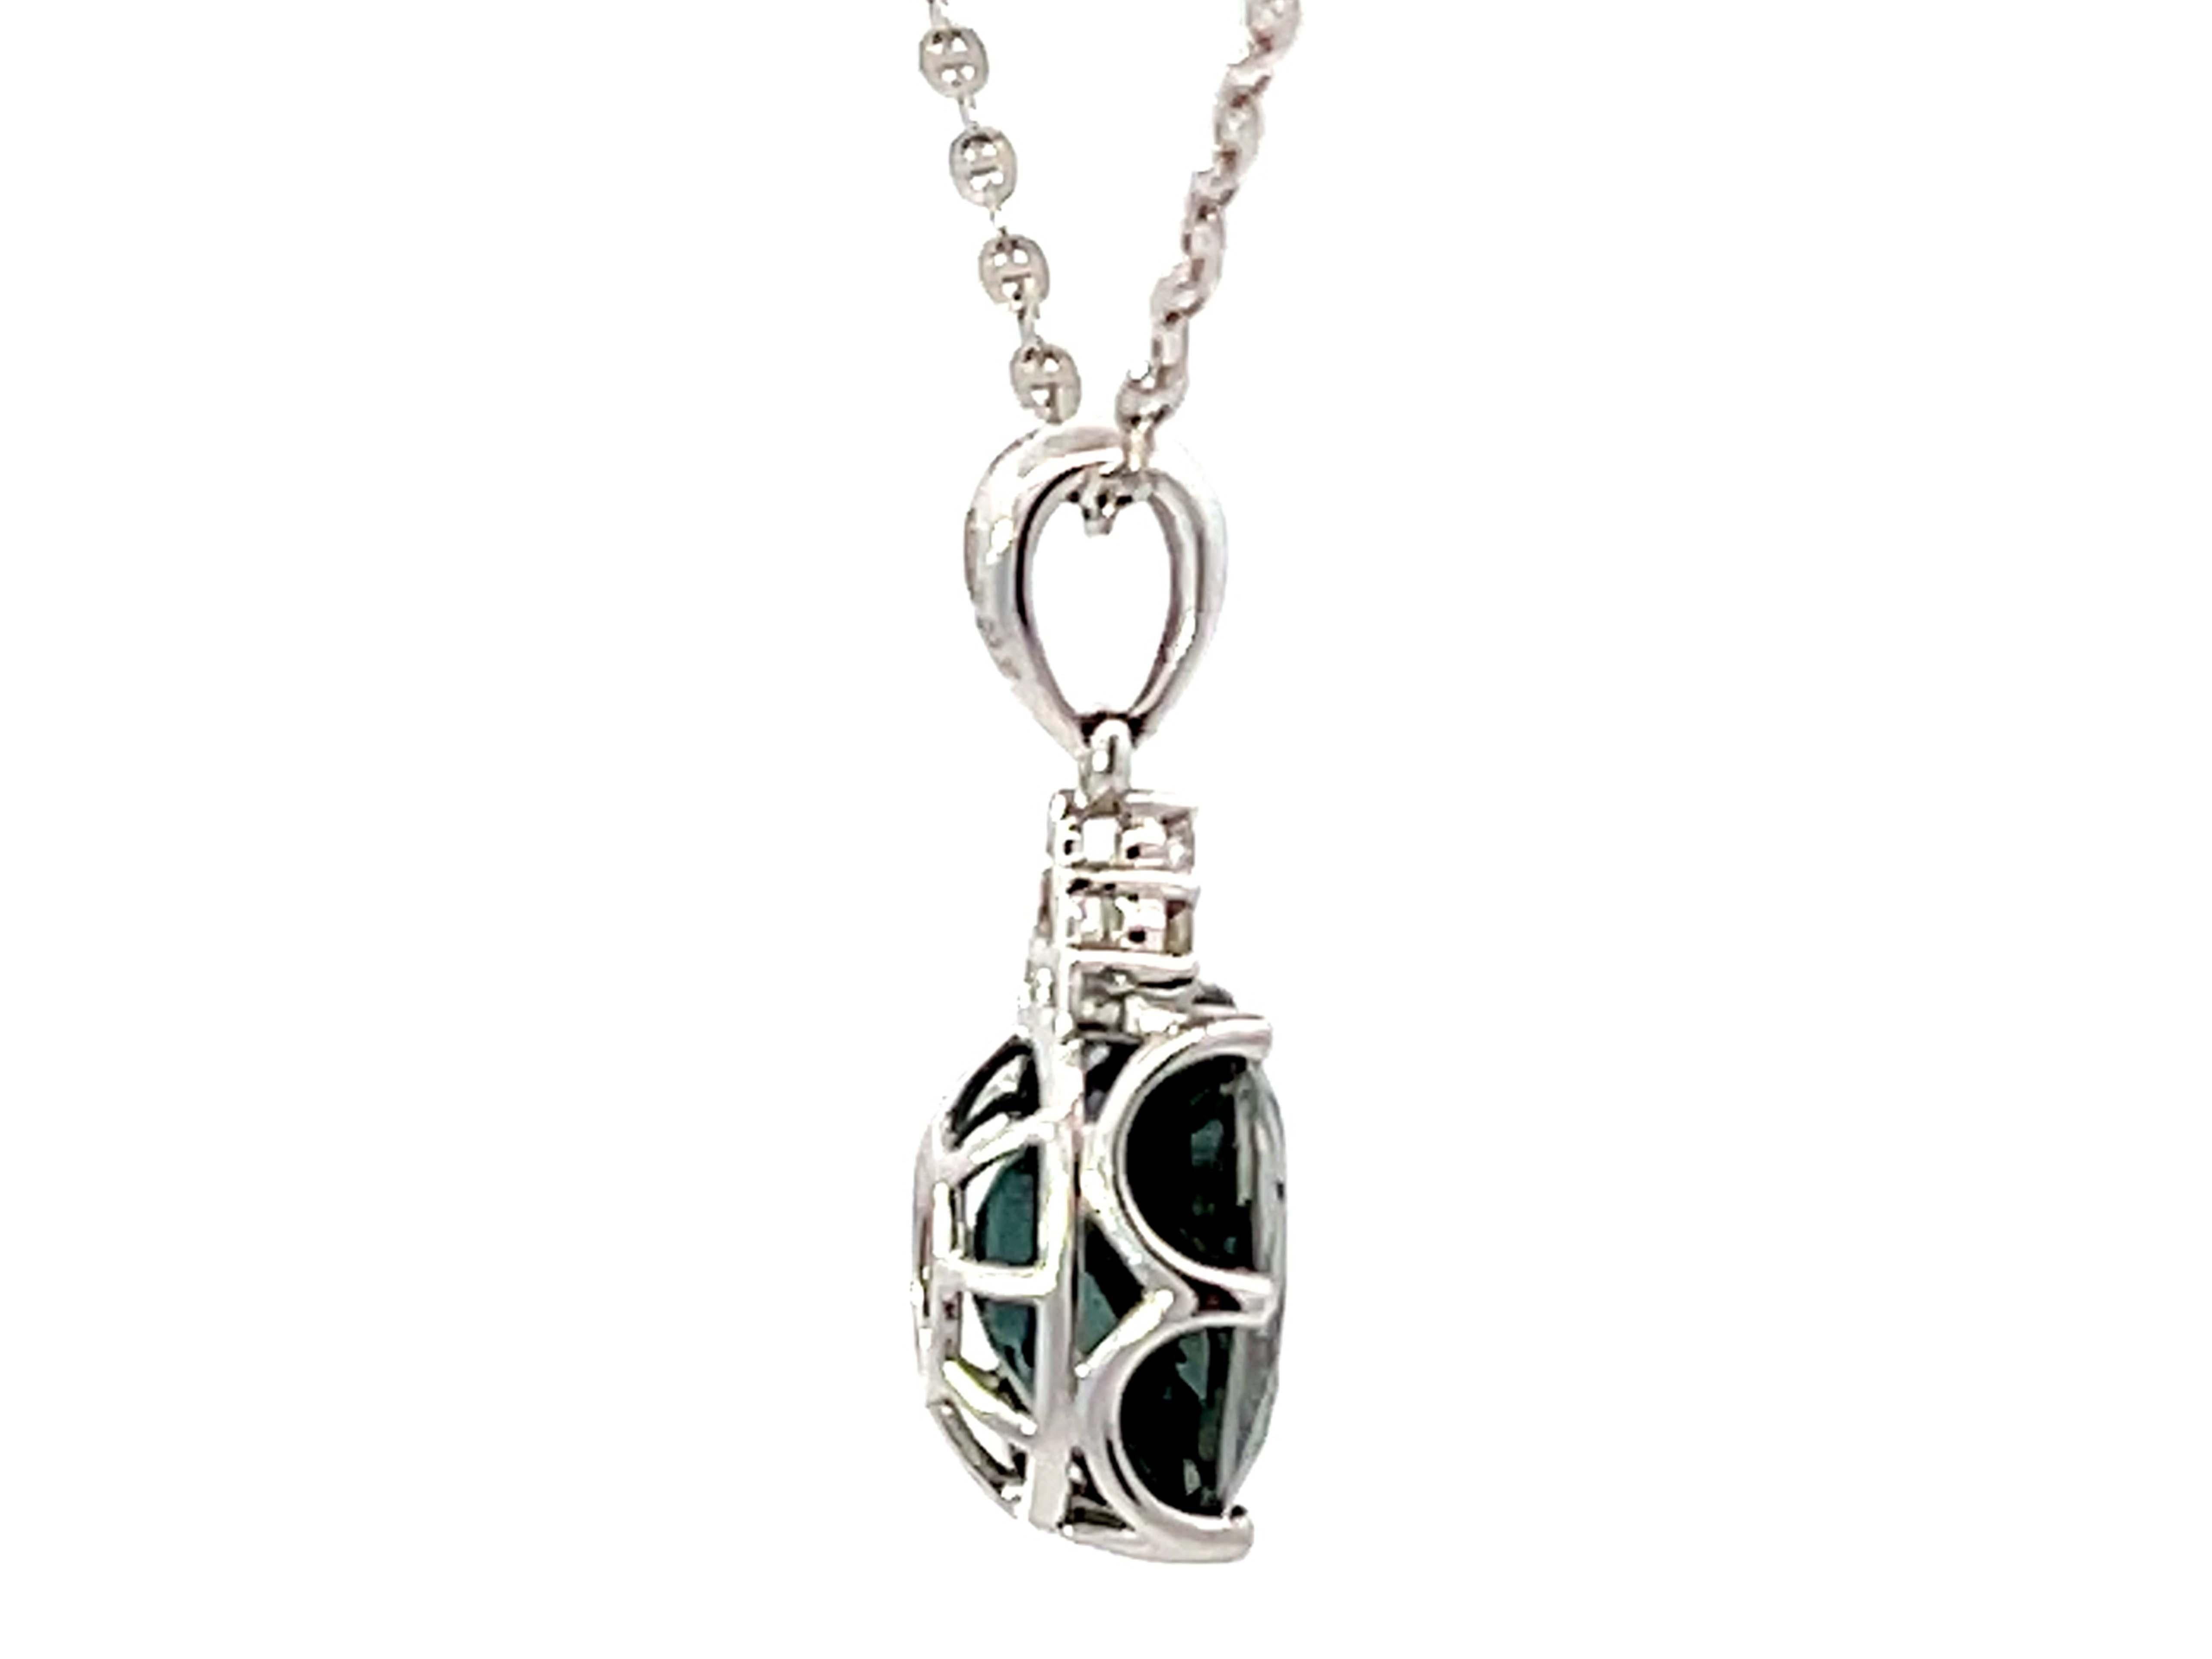 Blue Green Tourmaline Diamond Necklace Solid 18k White Gold In Excellent Condition For Sale In Honolulu, HI